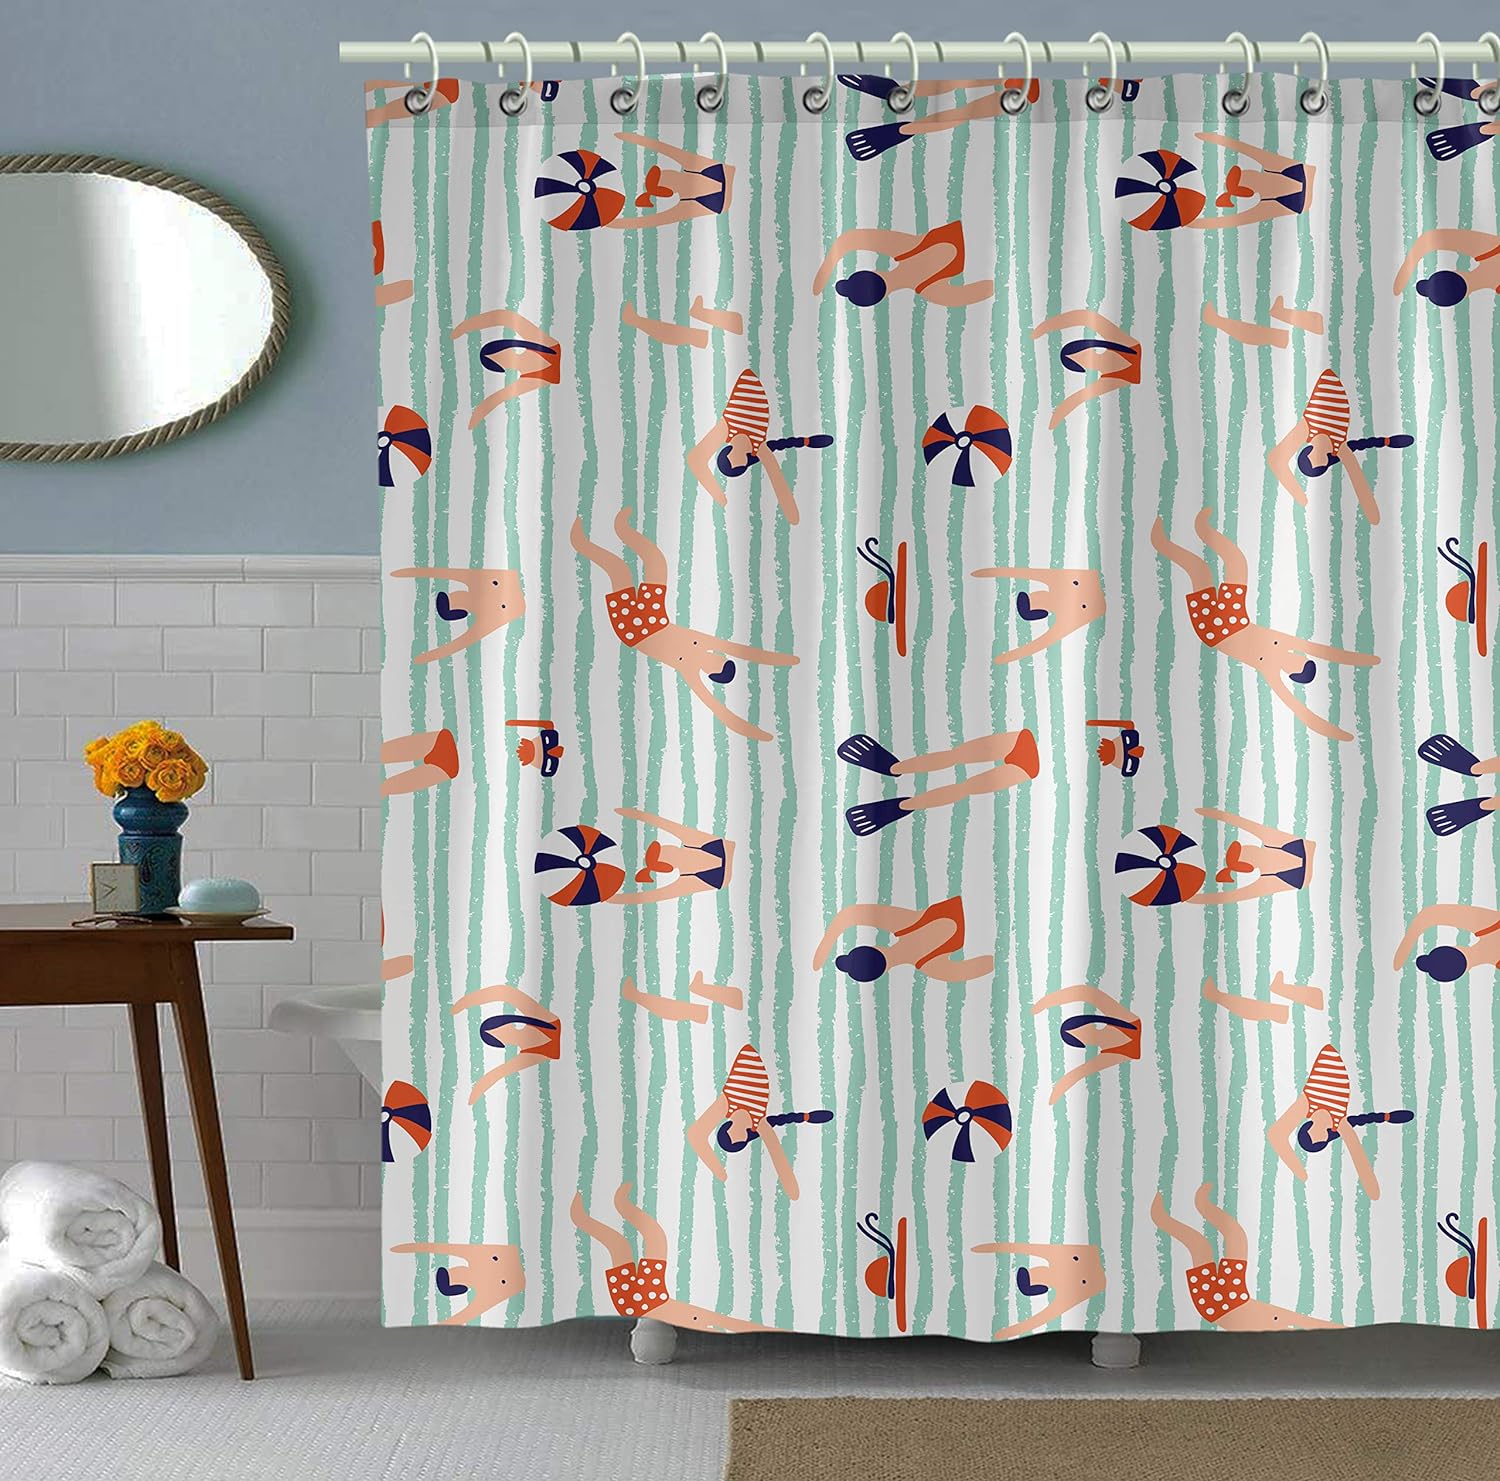 Swimming Lover’s Shower Curtain